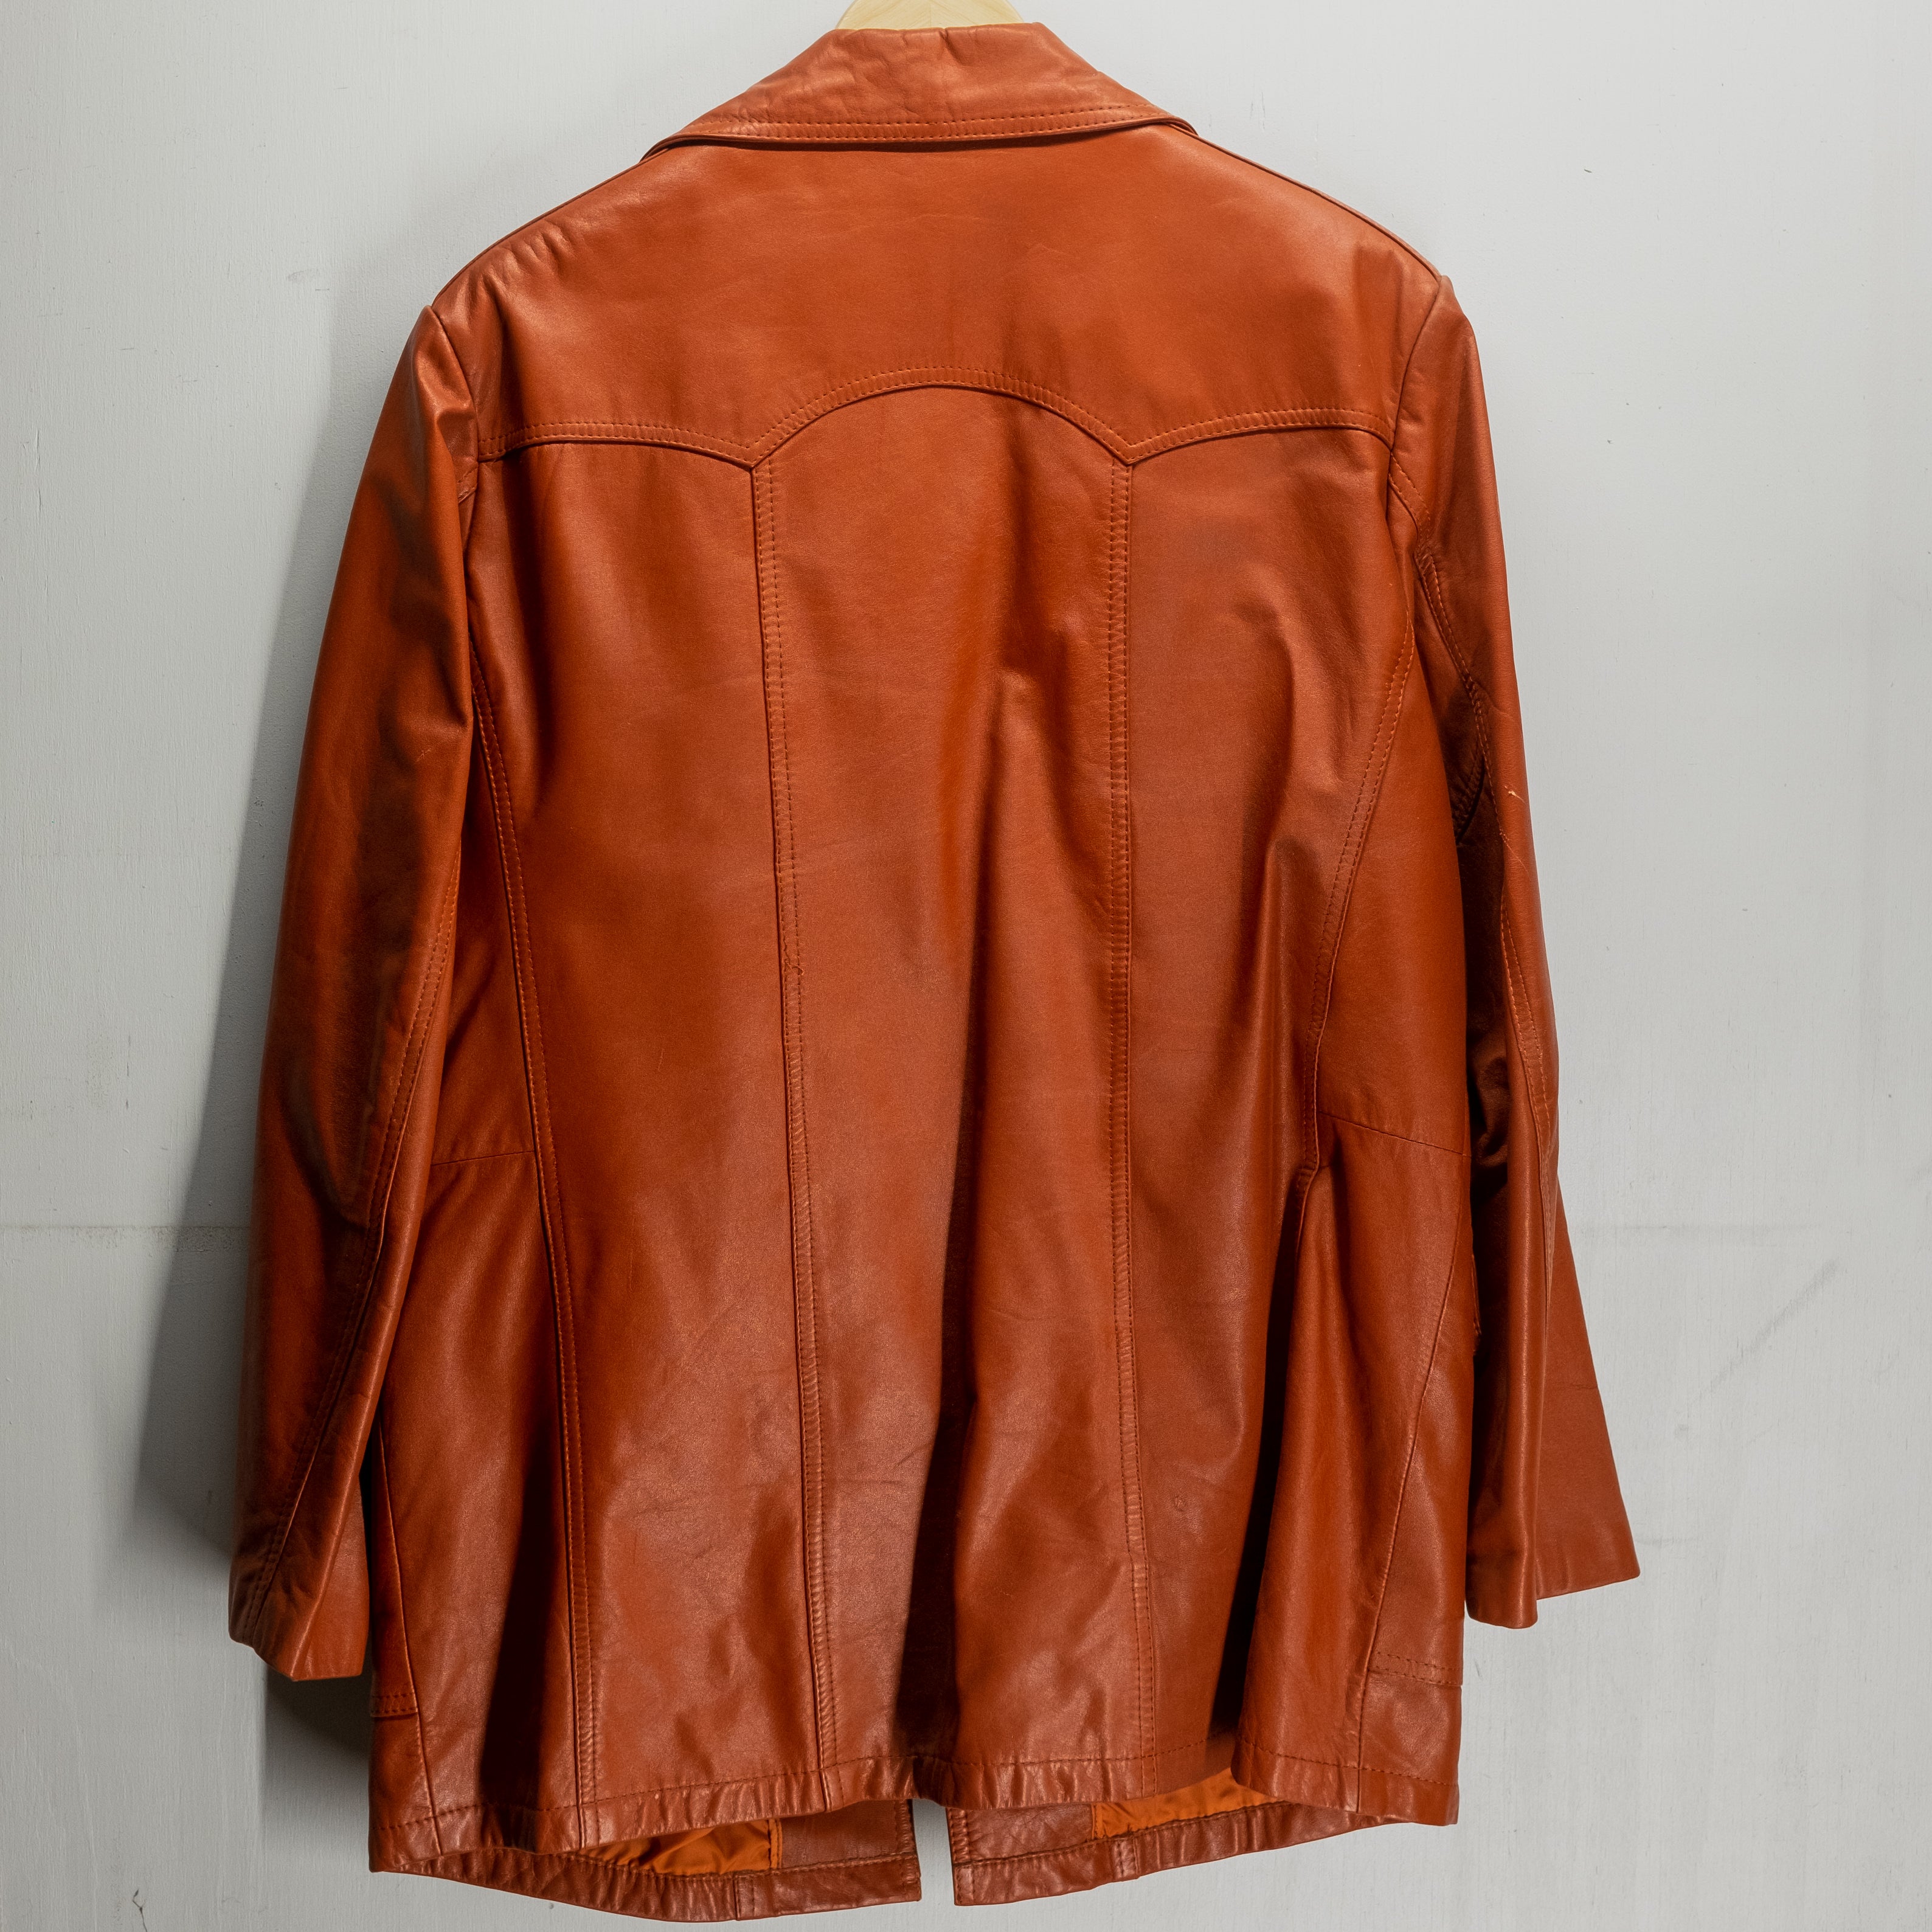 Vintage Sears Western Wear Leather Jacket (with lining)